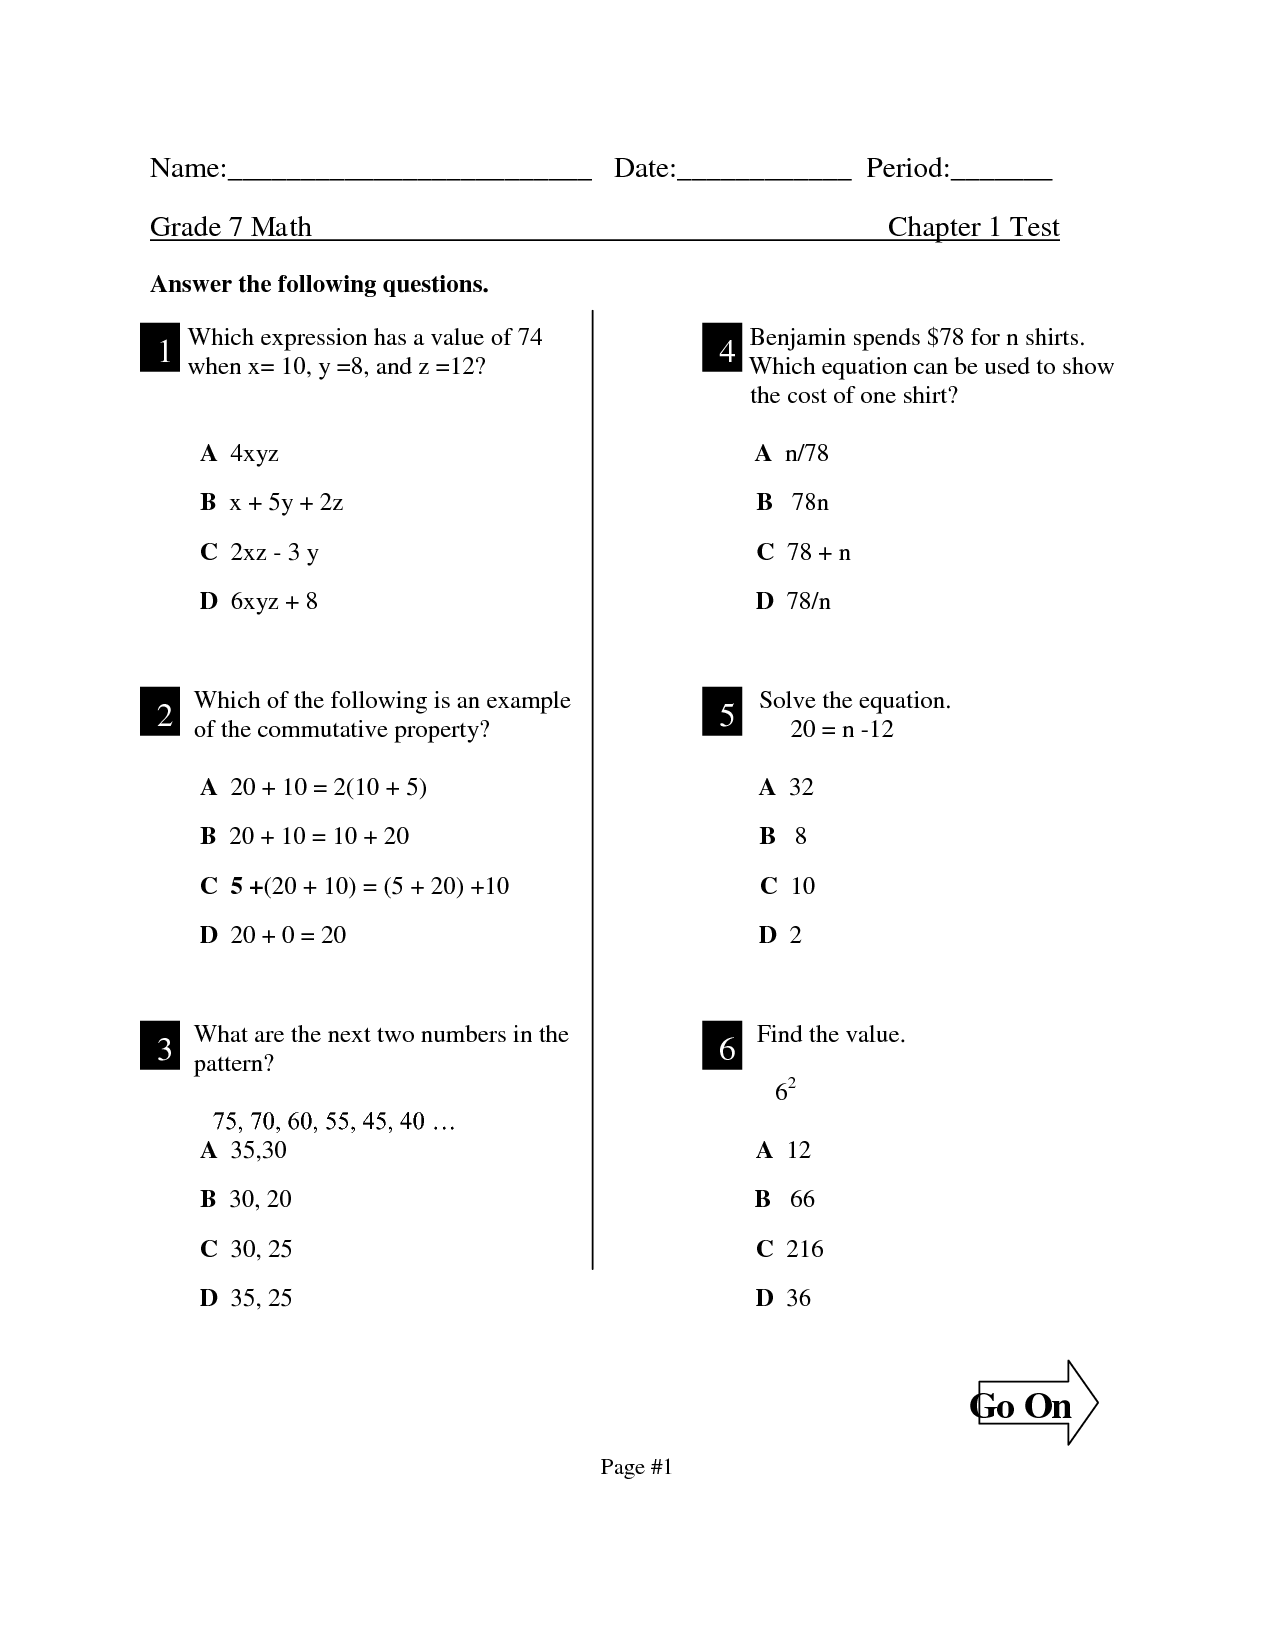 10-best-images-of-7th-grade-math-worksheets-with-answer-key-7th-grade-math-worksheets-algebra